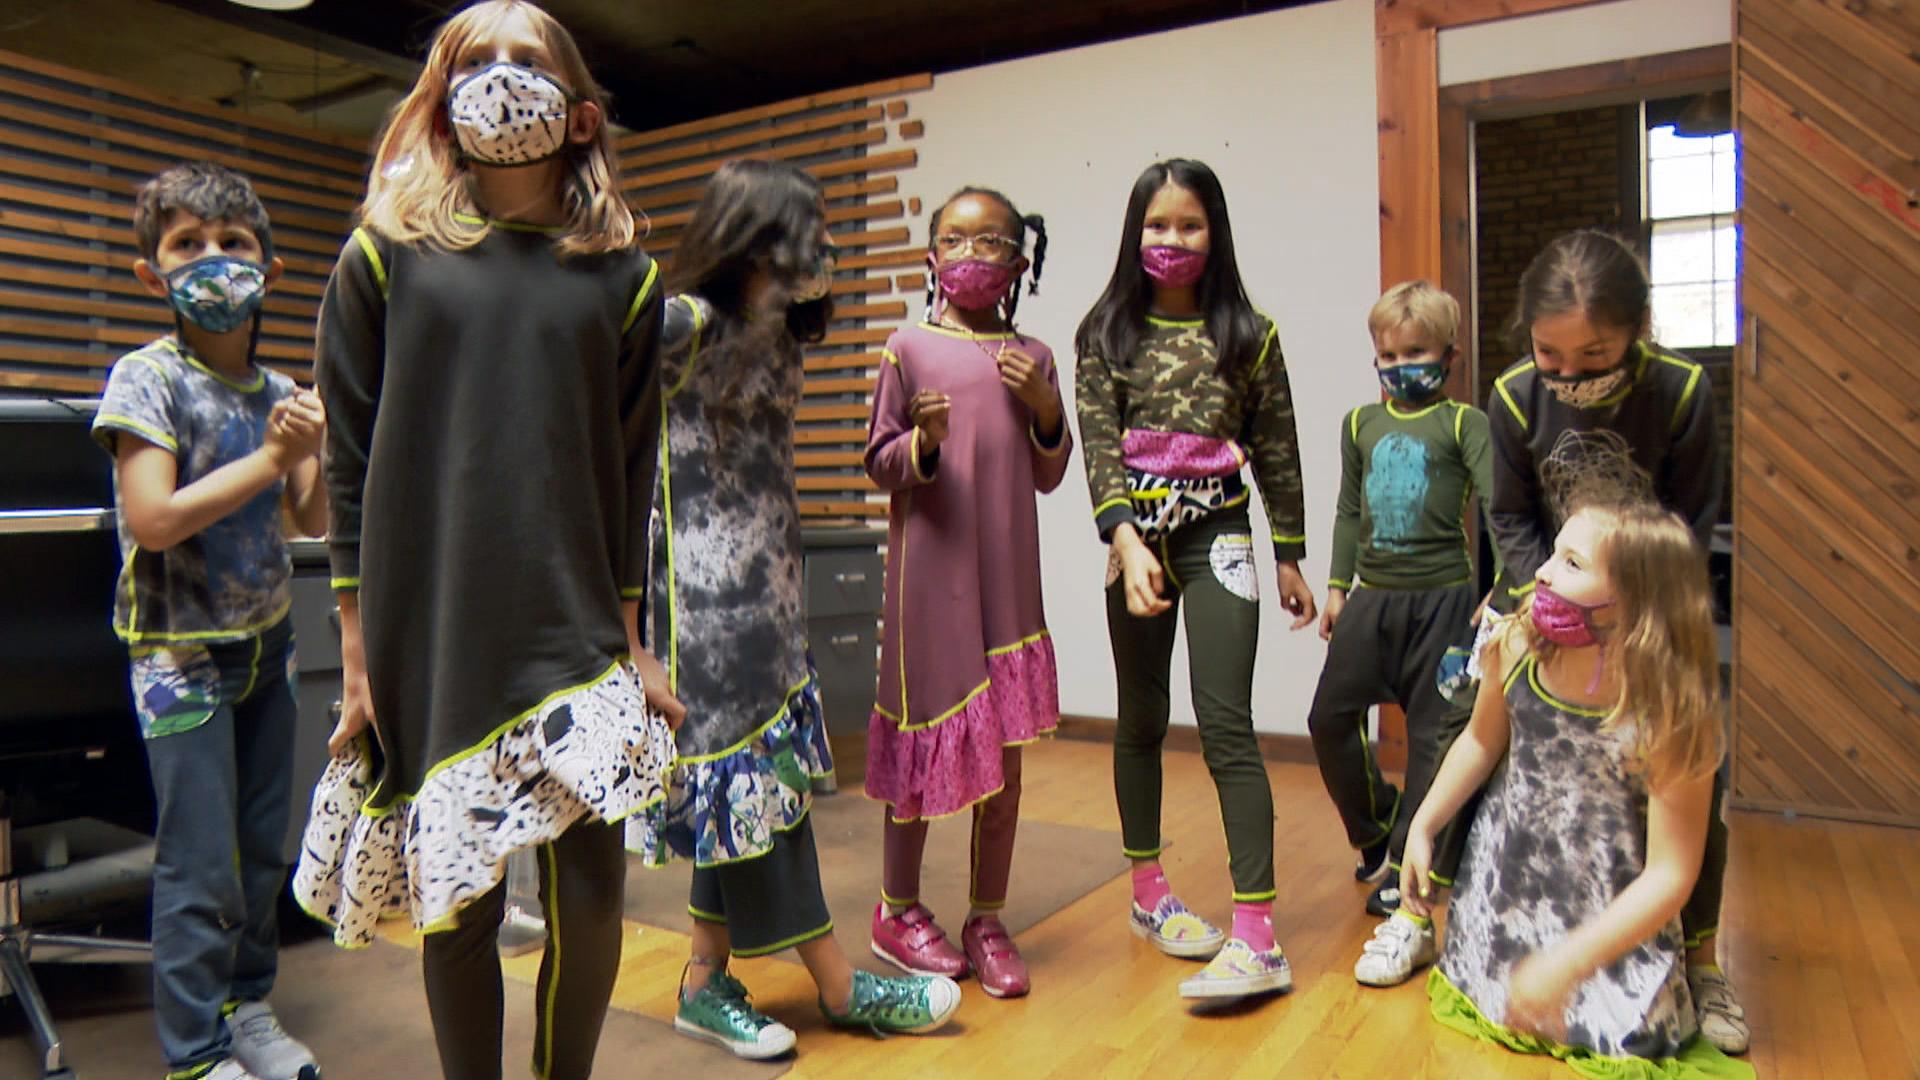 Hannah Lewis, top-right, and her classmates dance while wearing Minor Details clothing at Delicious Design League, a creative studio, on April 15, 2021. (WTTW News)